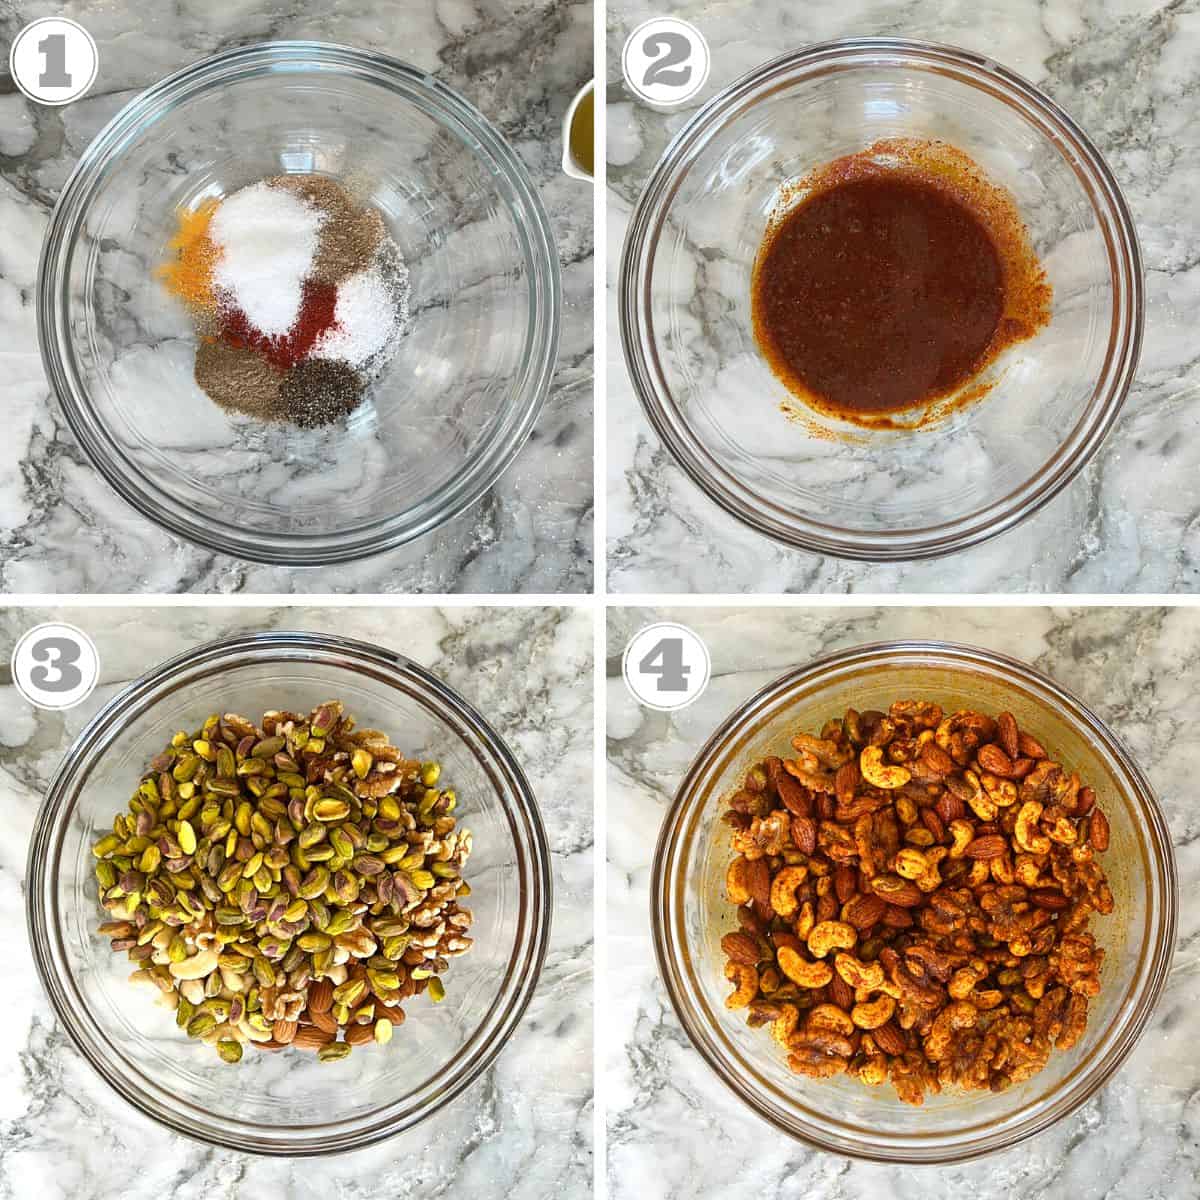 photos one through four showing how to make masala nuts 